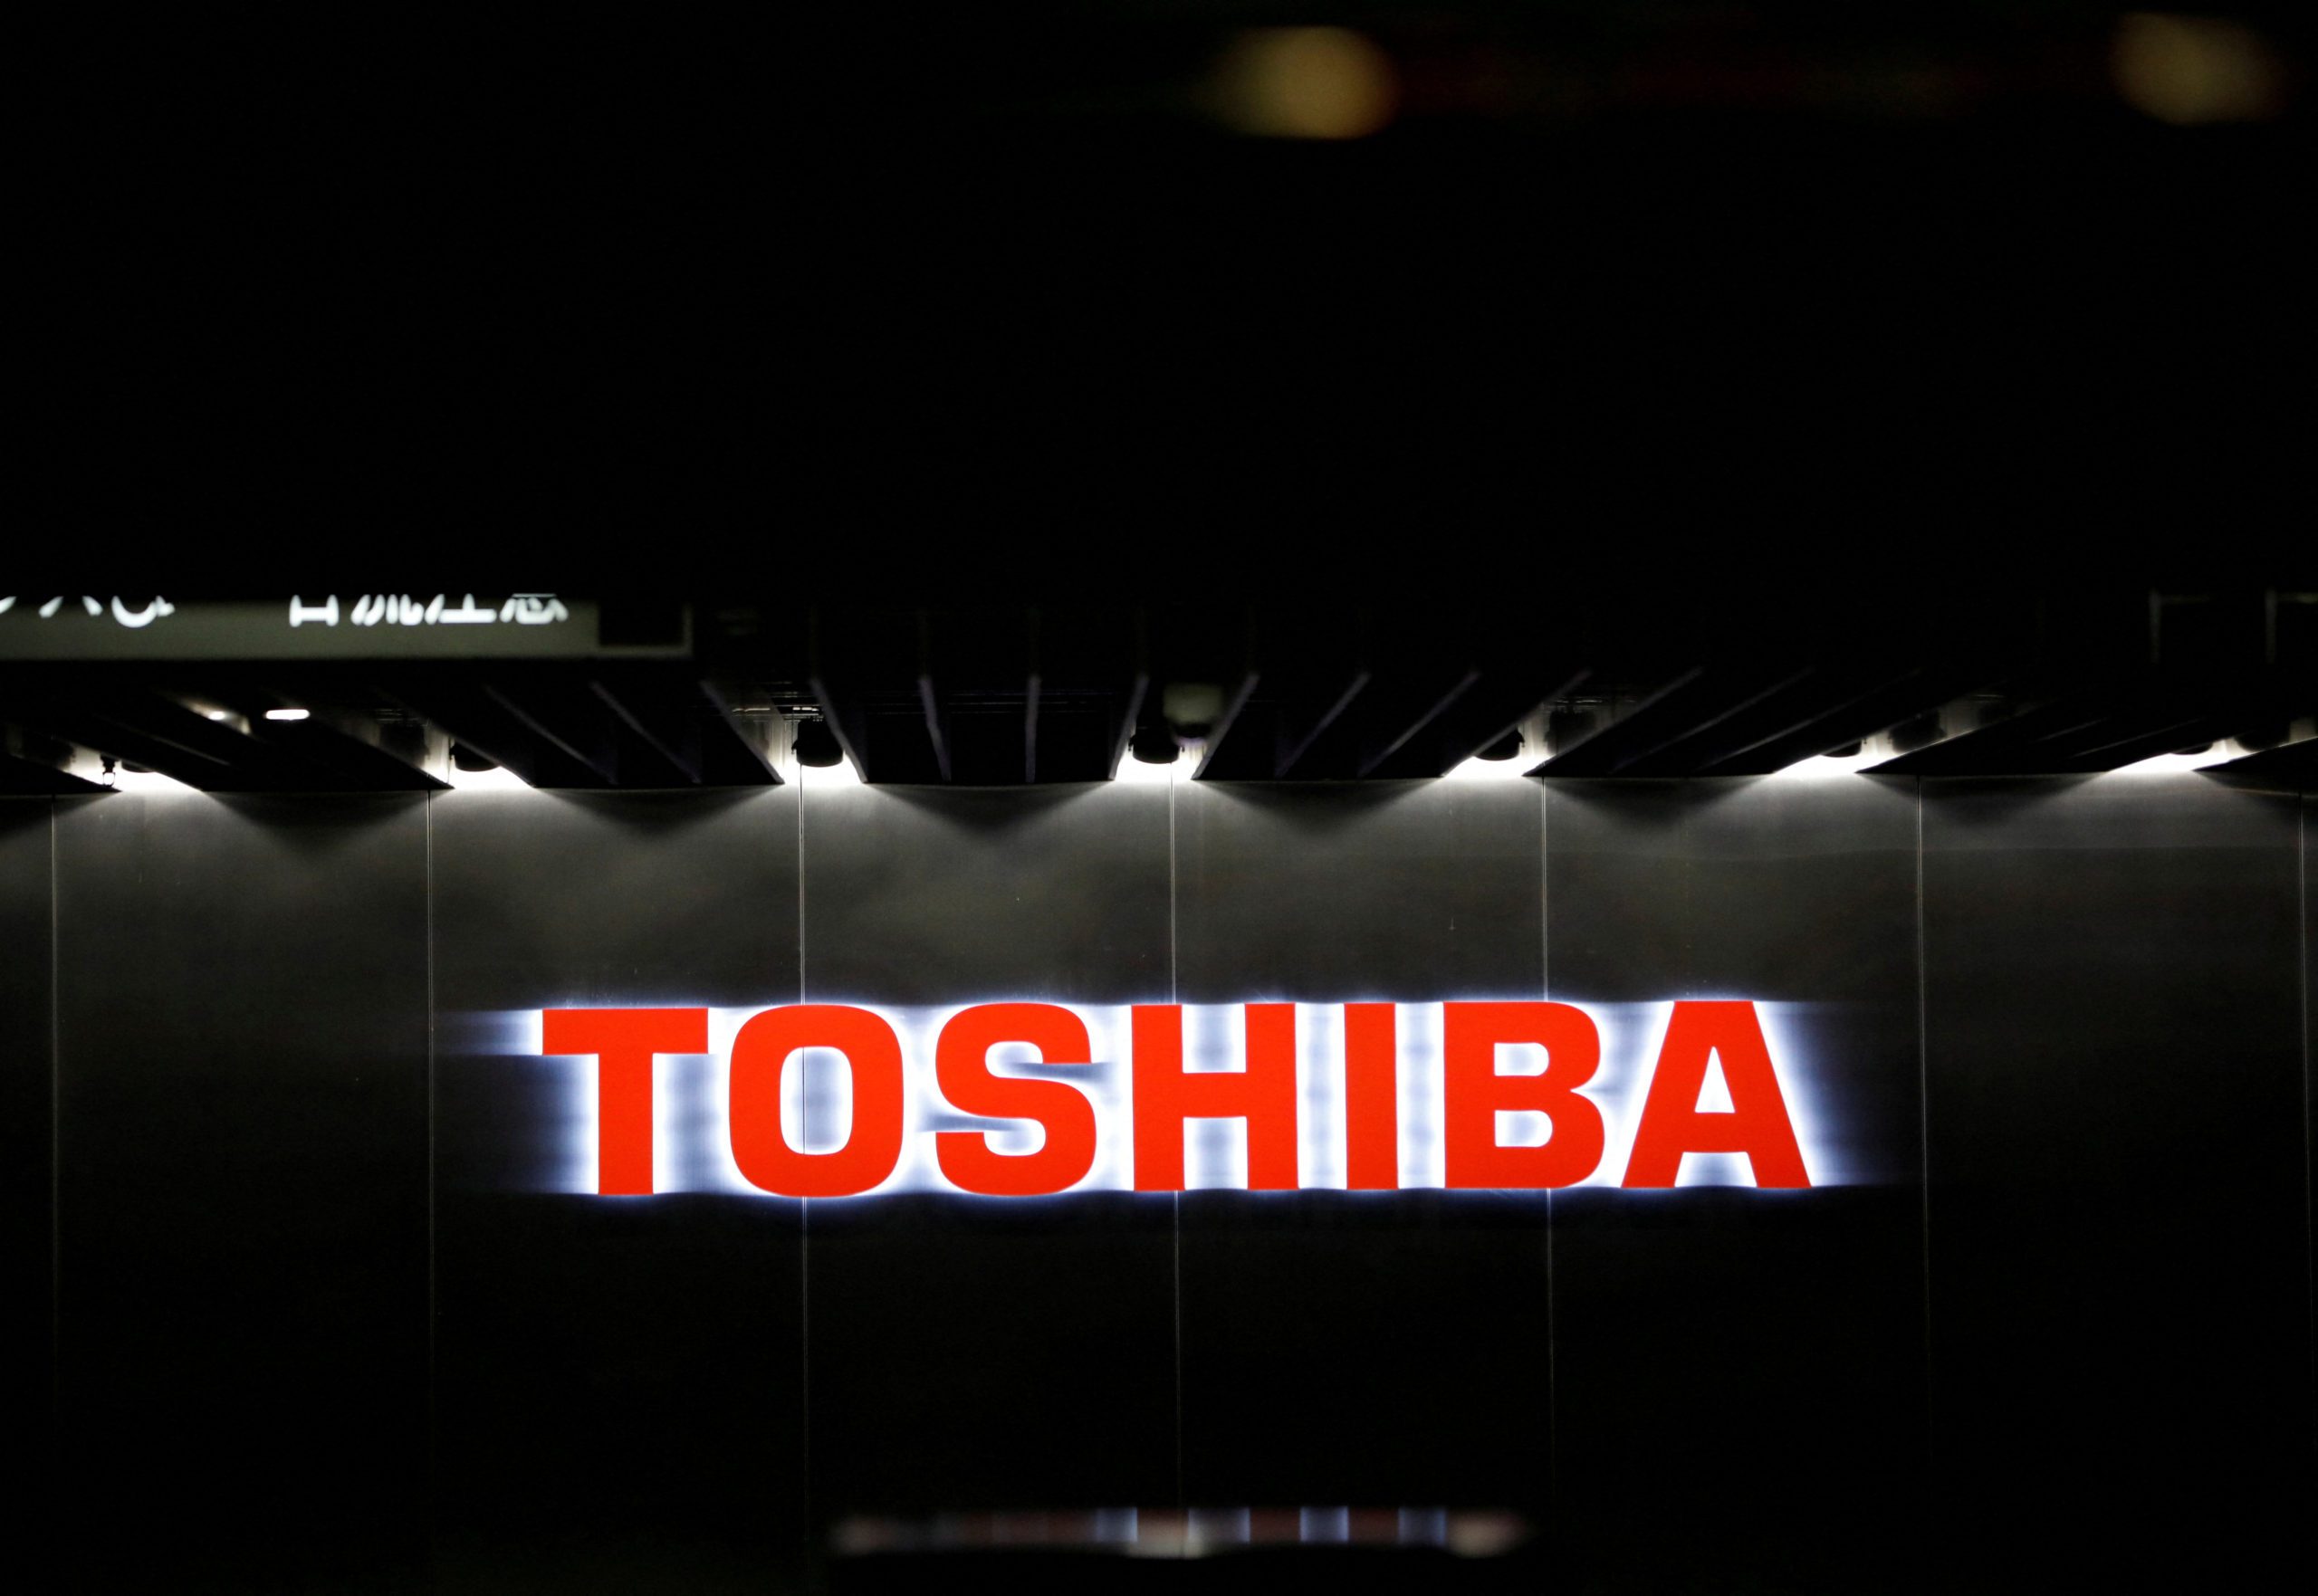 JIP's tender offer for Toshiba pushed back to Aug due to regulatory delay